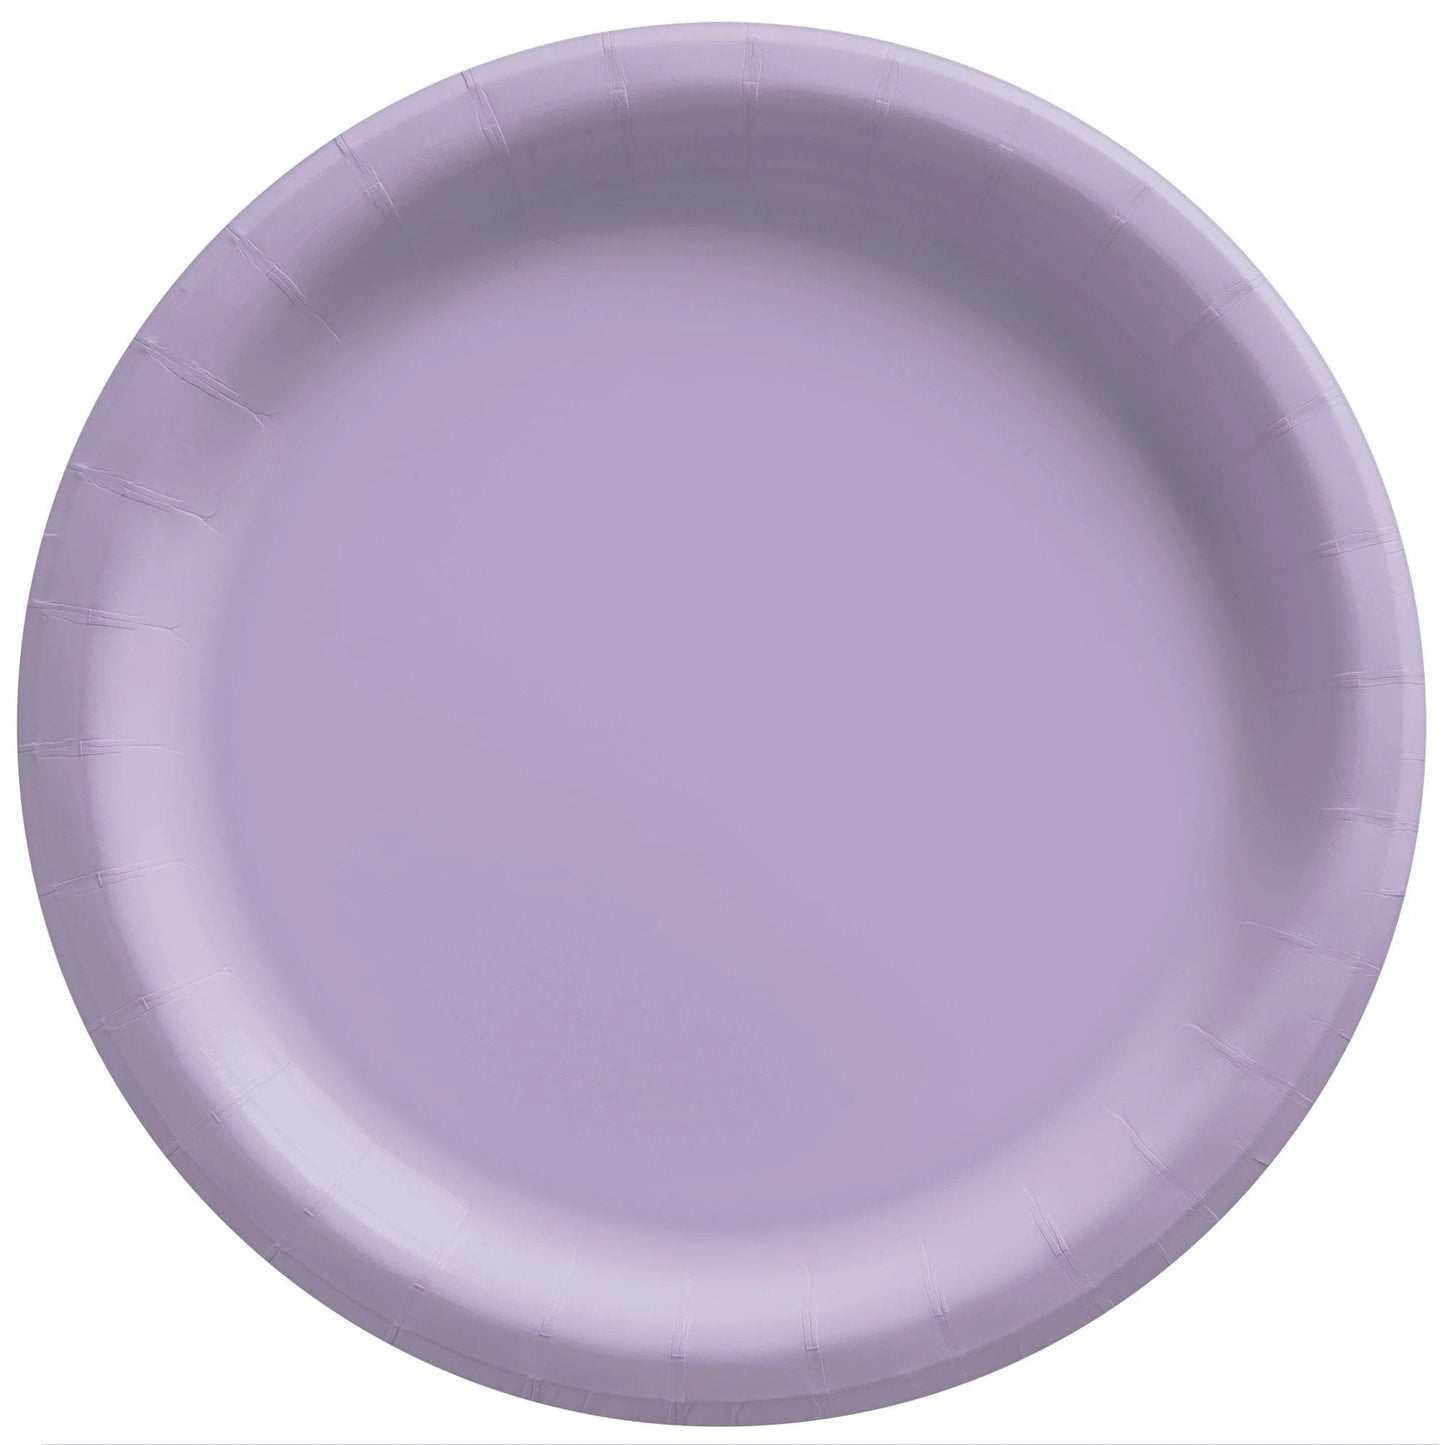 Extra Sturdy 10in Lavender Paper Party Plates, 50 ct